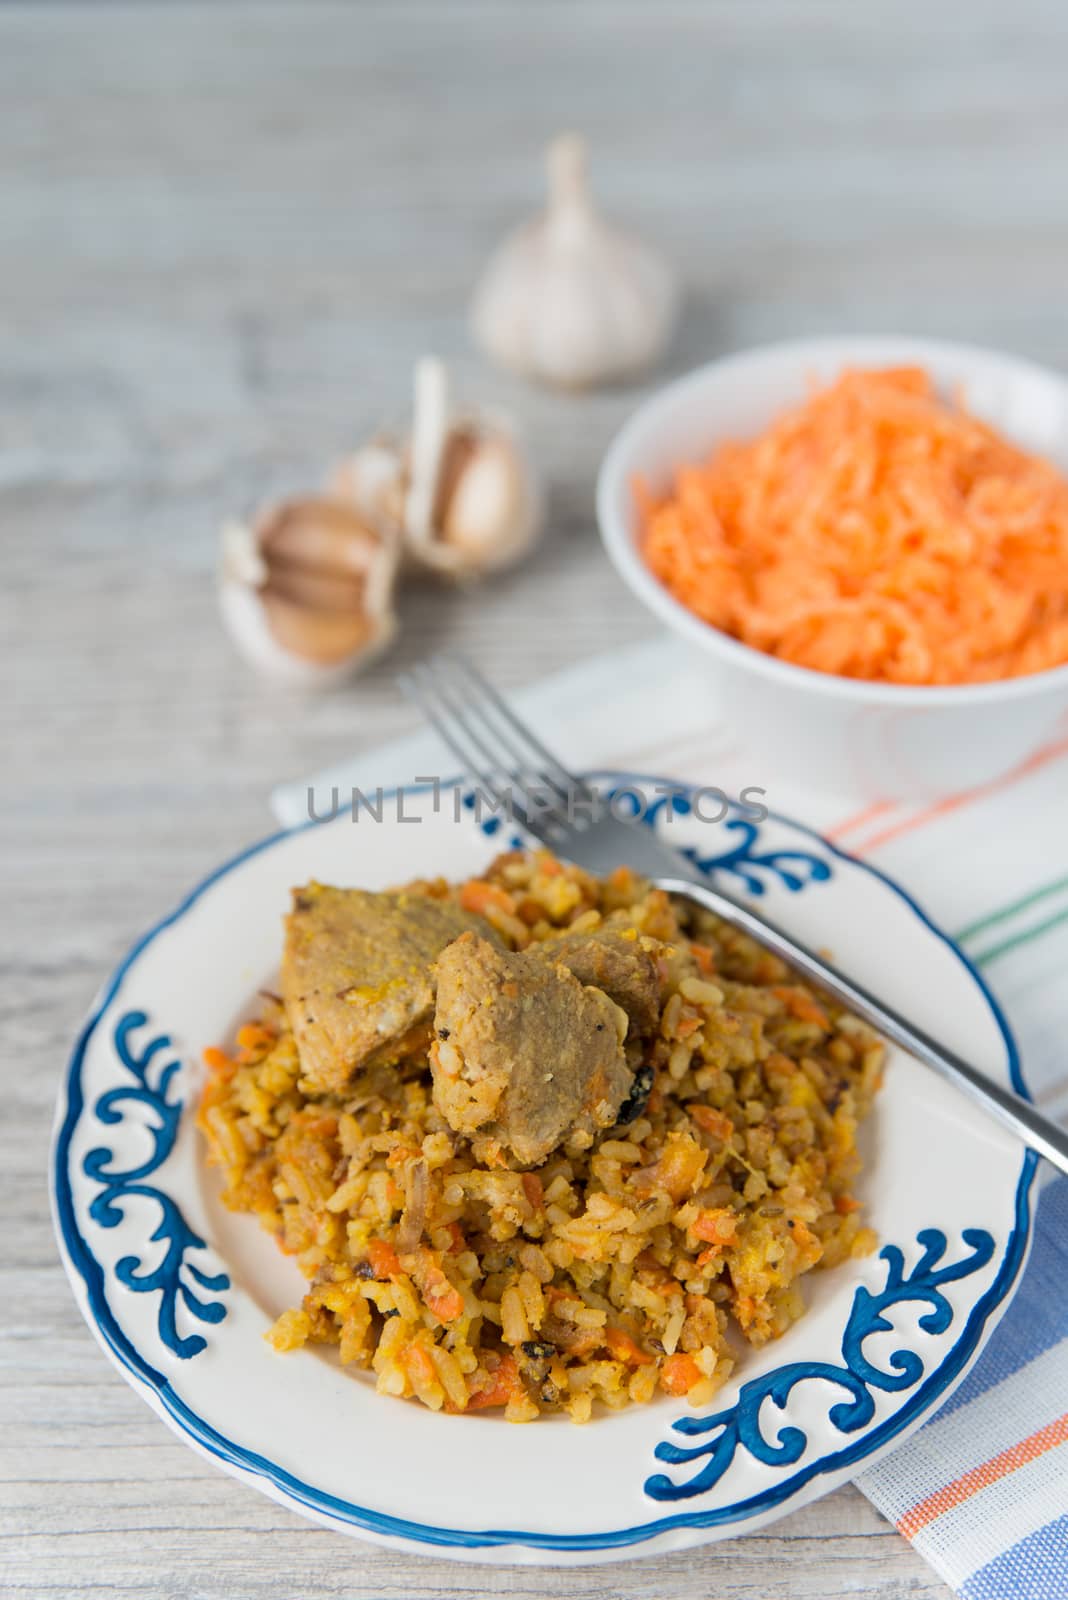 Plate of rice and meat dish pilau by Linaga